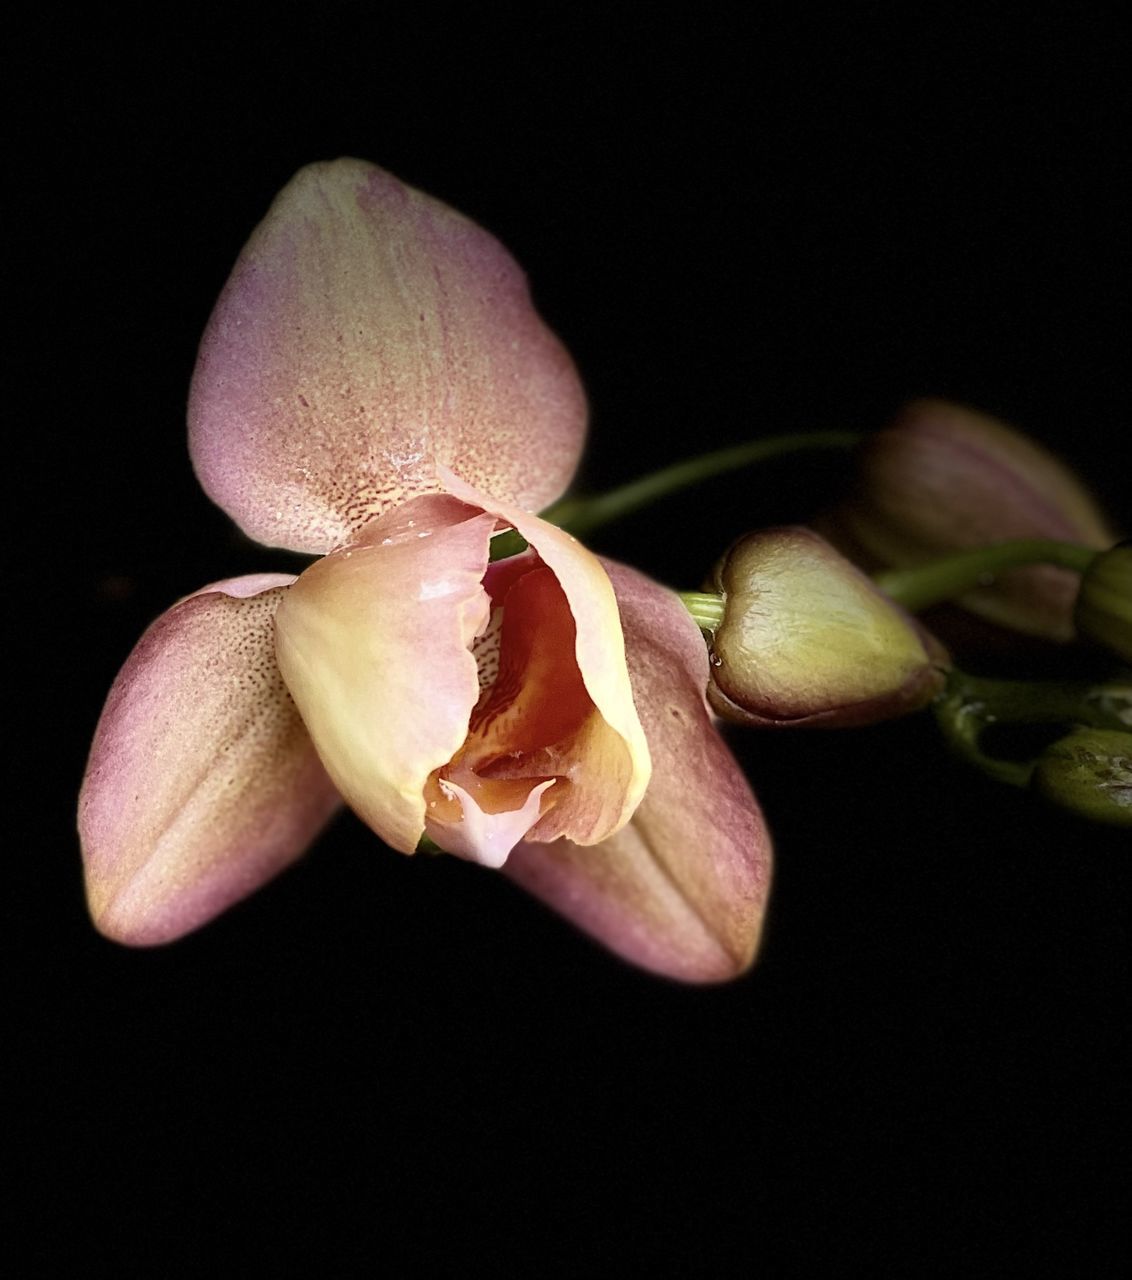 flower, black background, macro photography, freshness, plant, petal, close-up, studio shot, flowering plant, orchid, beauty in nature, plant stem, no people, leaf, indoors, yellow, nature, growth, fragility, inflorescence, flower head, pink, food, food and drink, blossom, healthy eating